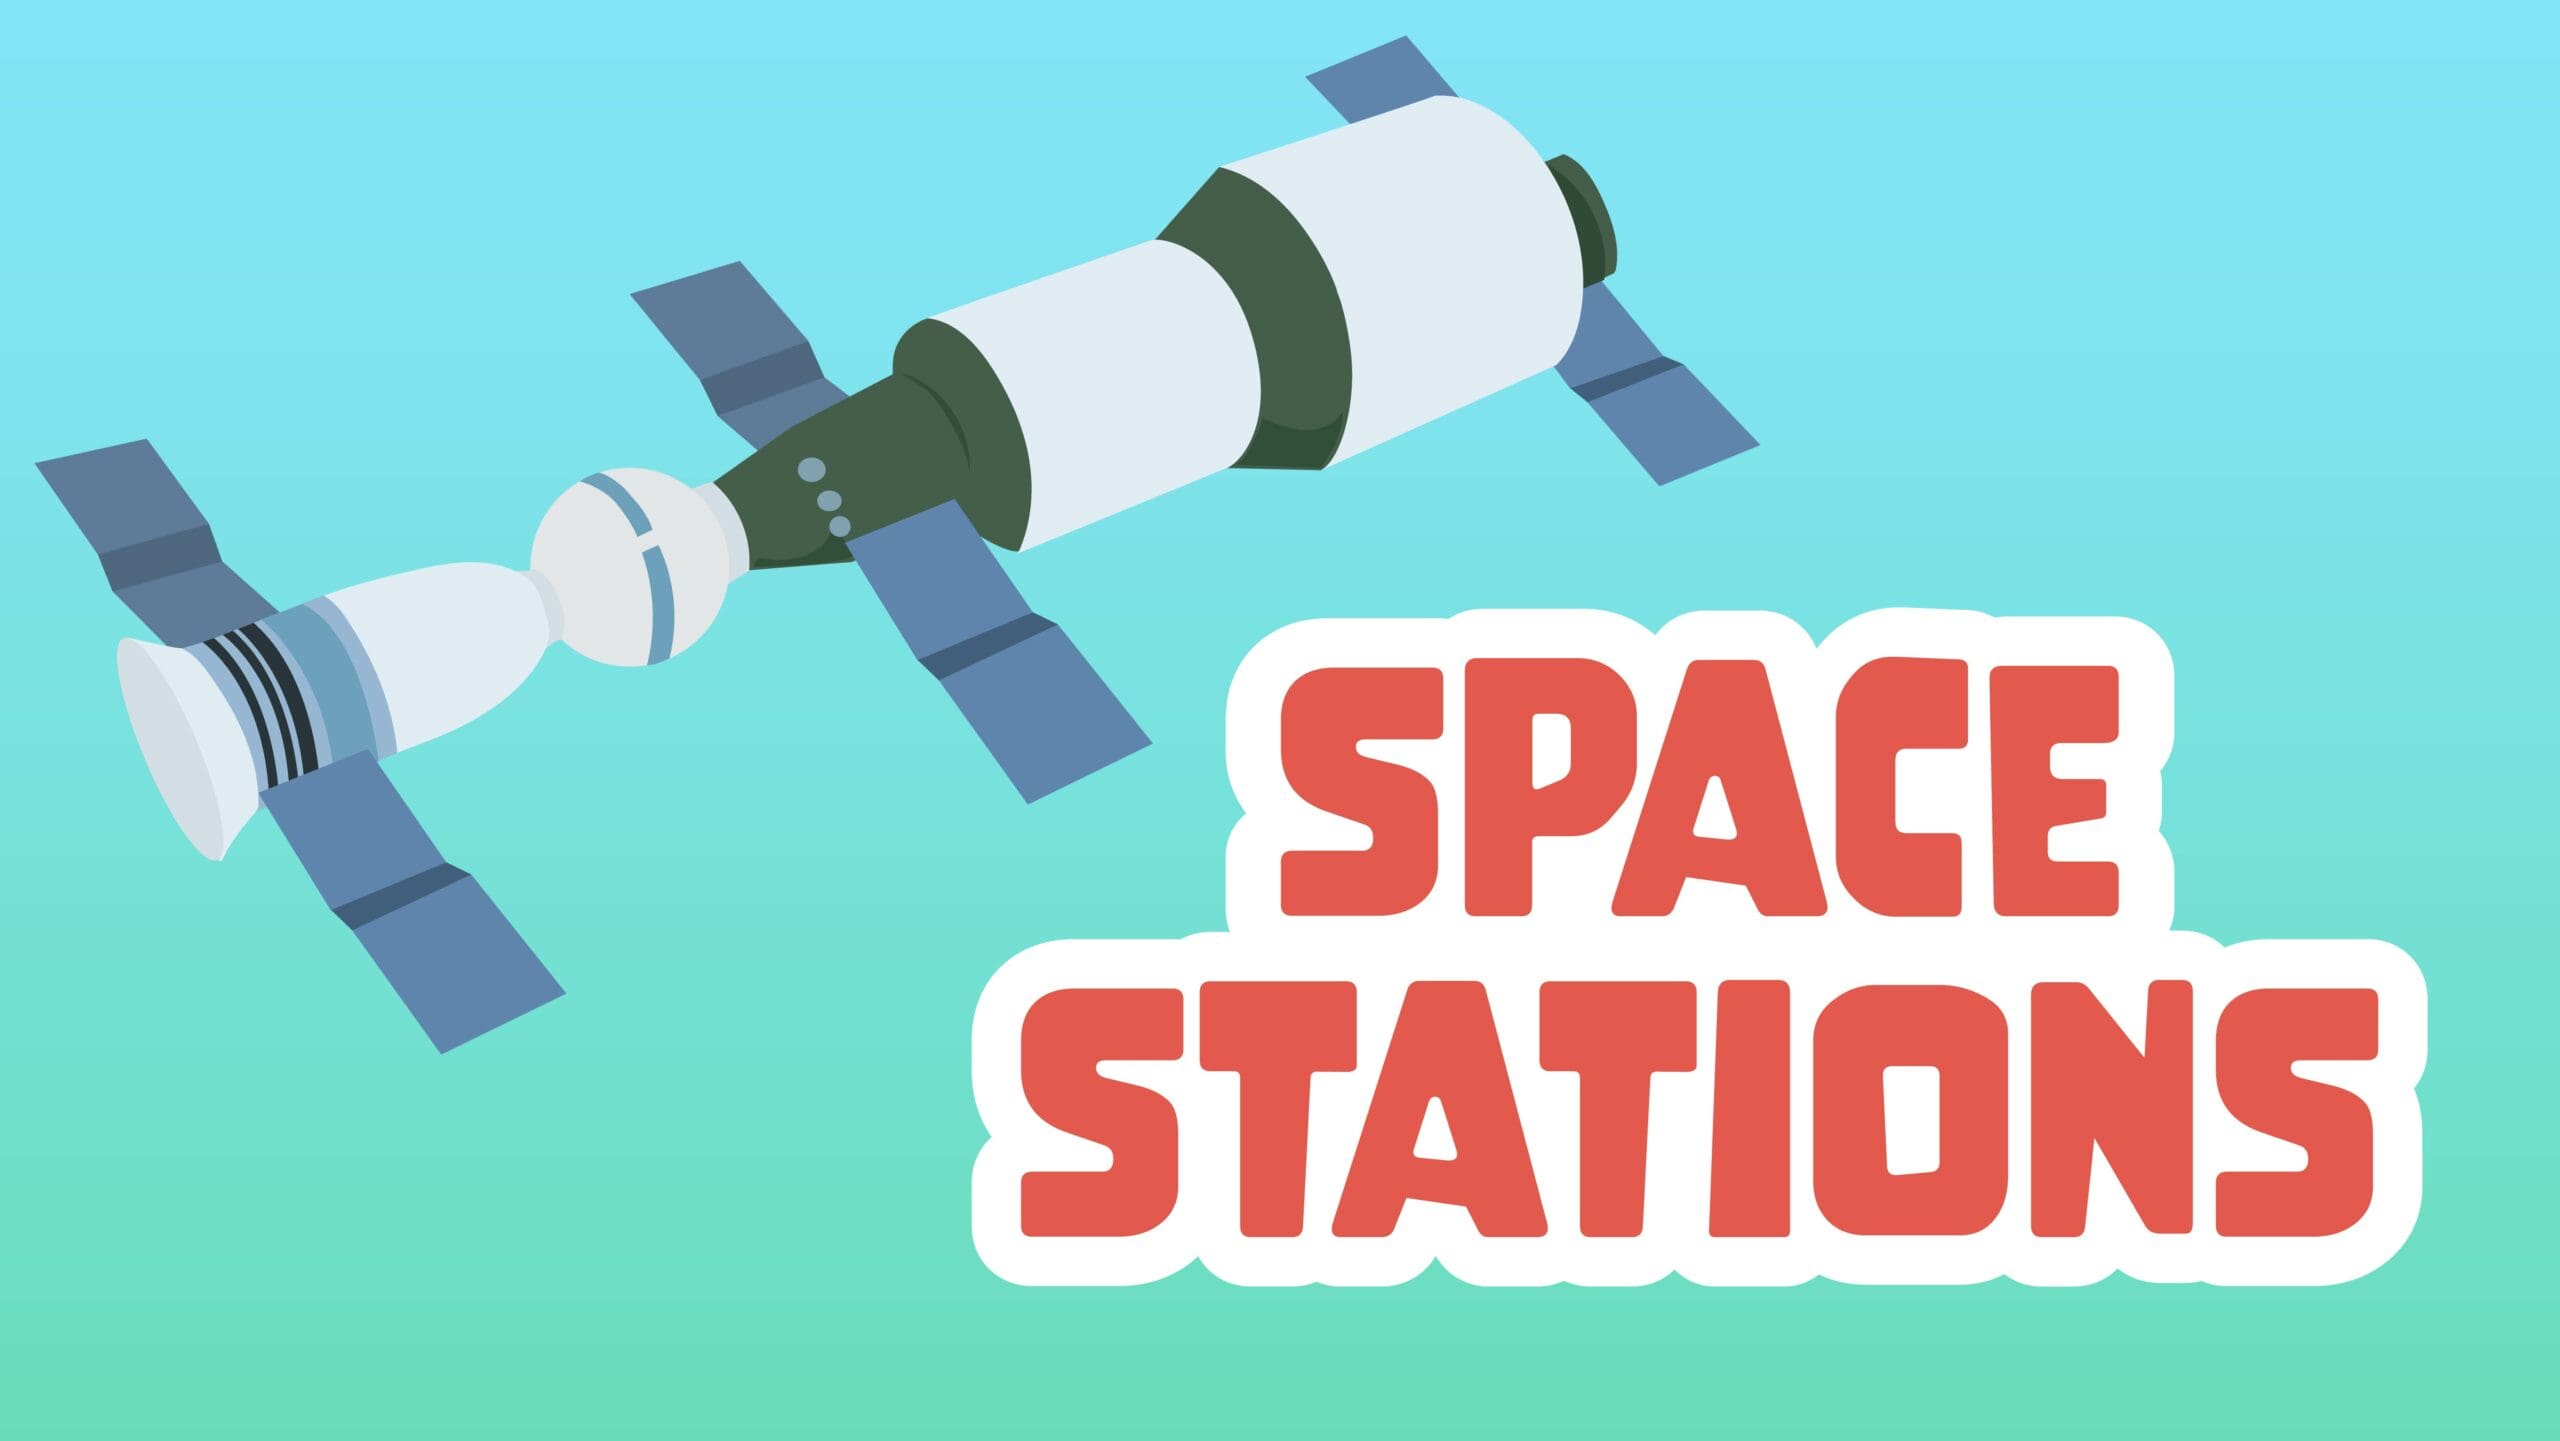 Space Stations Facts for Kids – 5 Spectacular Facts About Space Stations